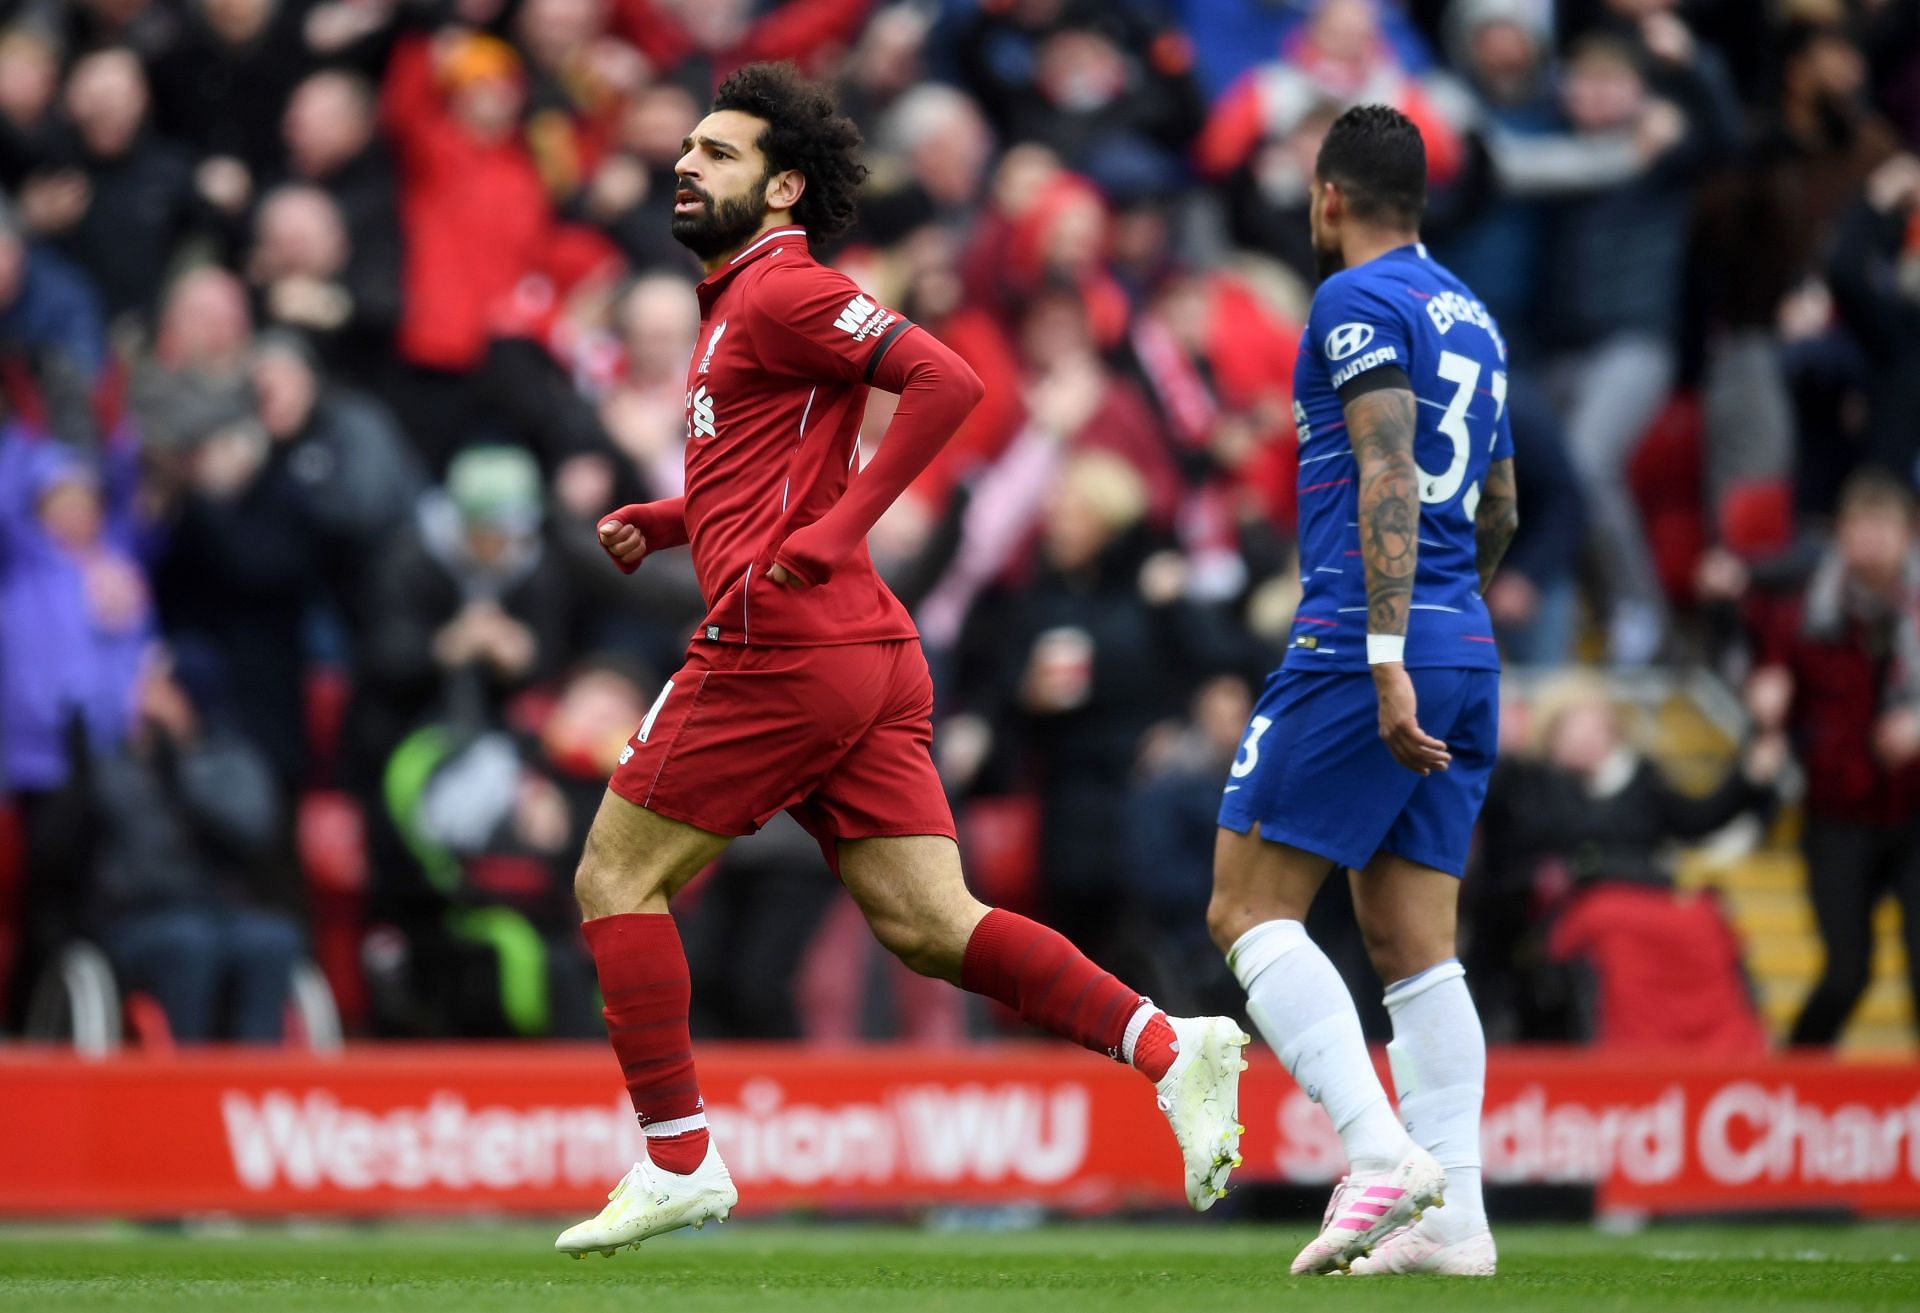 Chelsea continue to rue the day they let Mohamed Salah leave London.